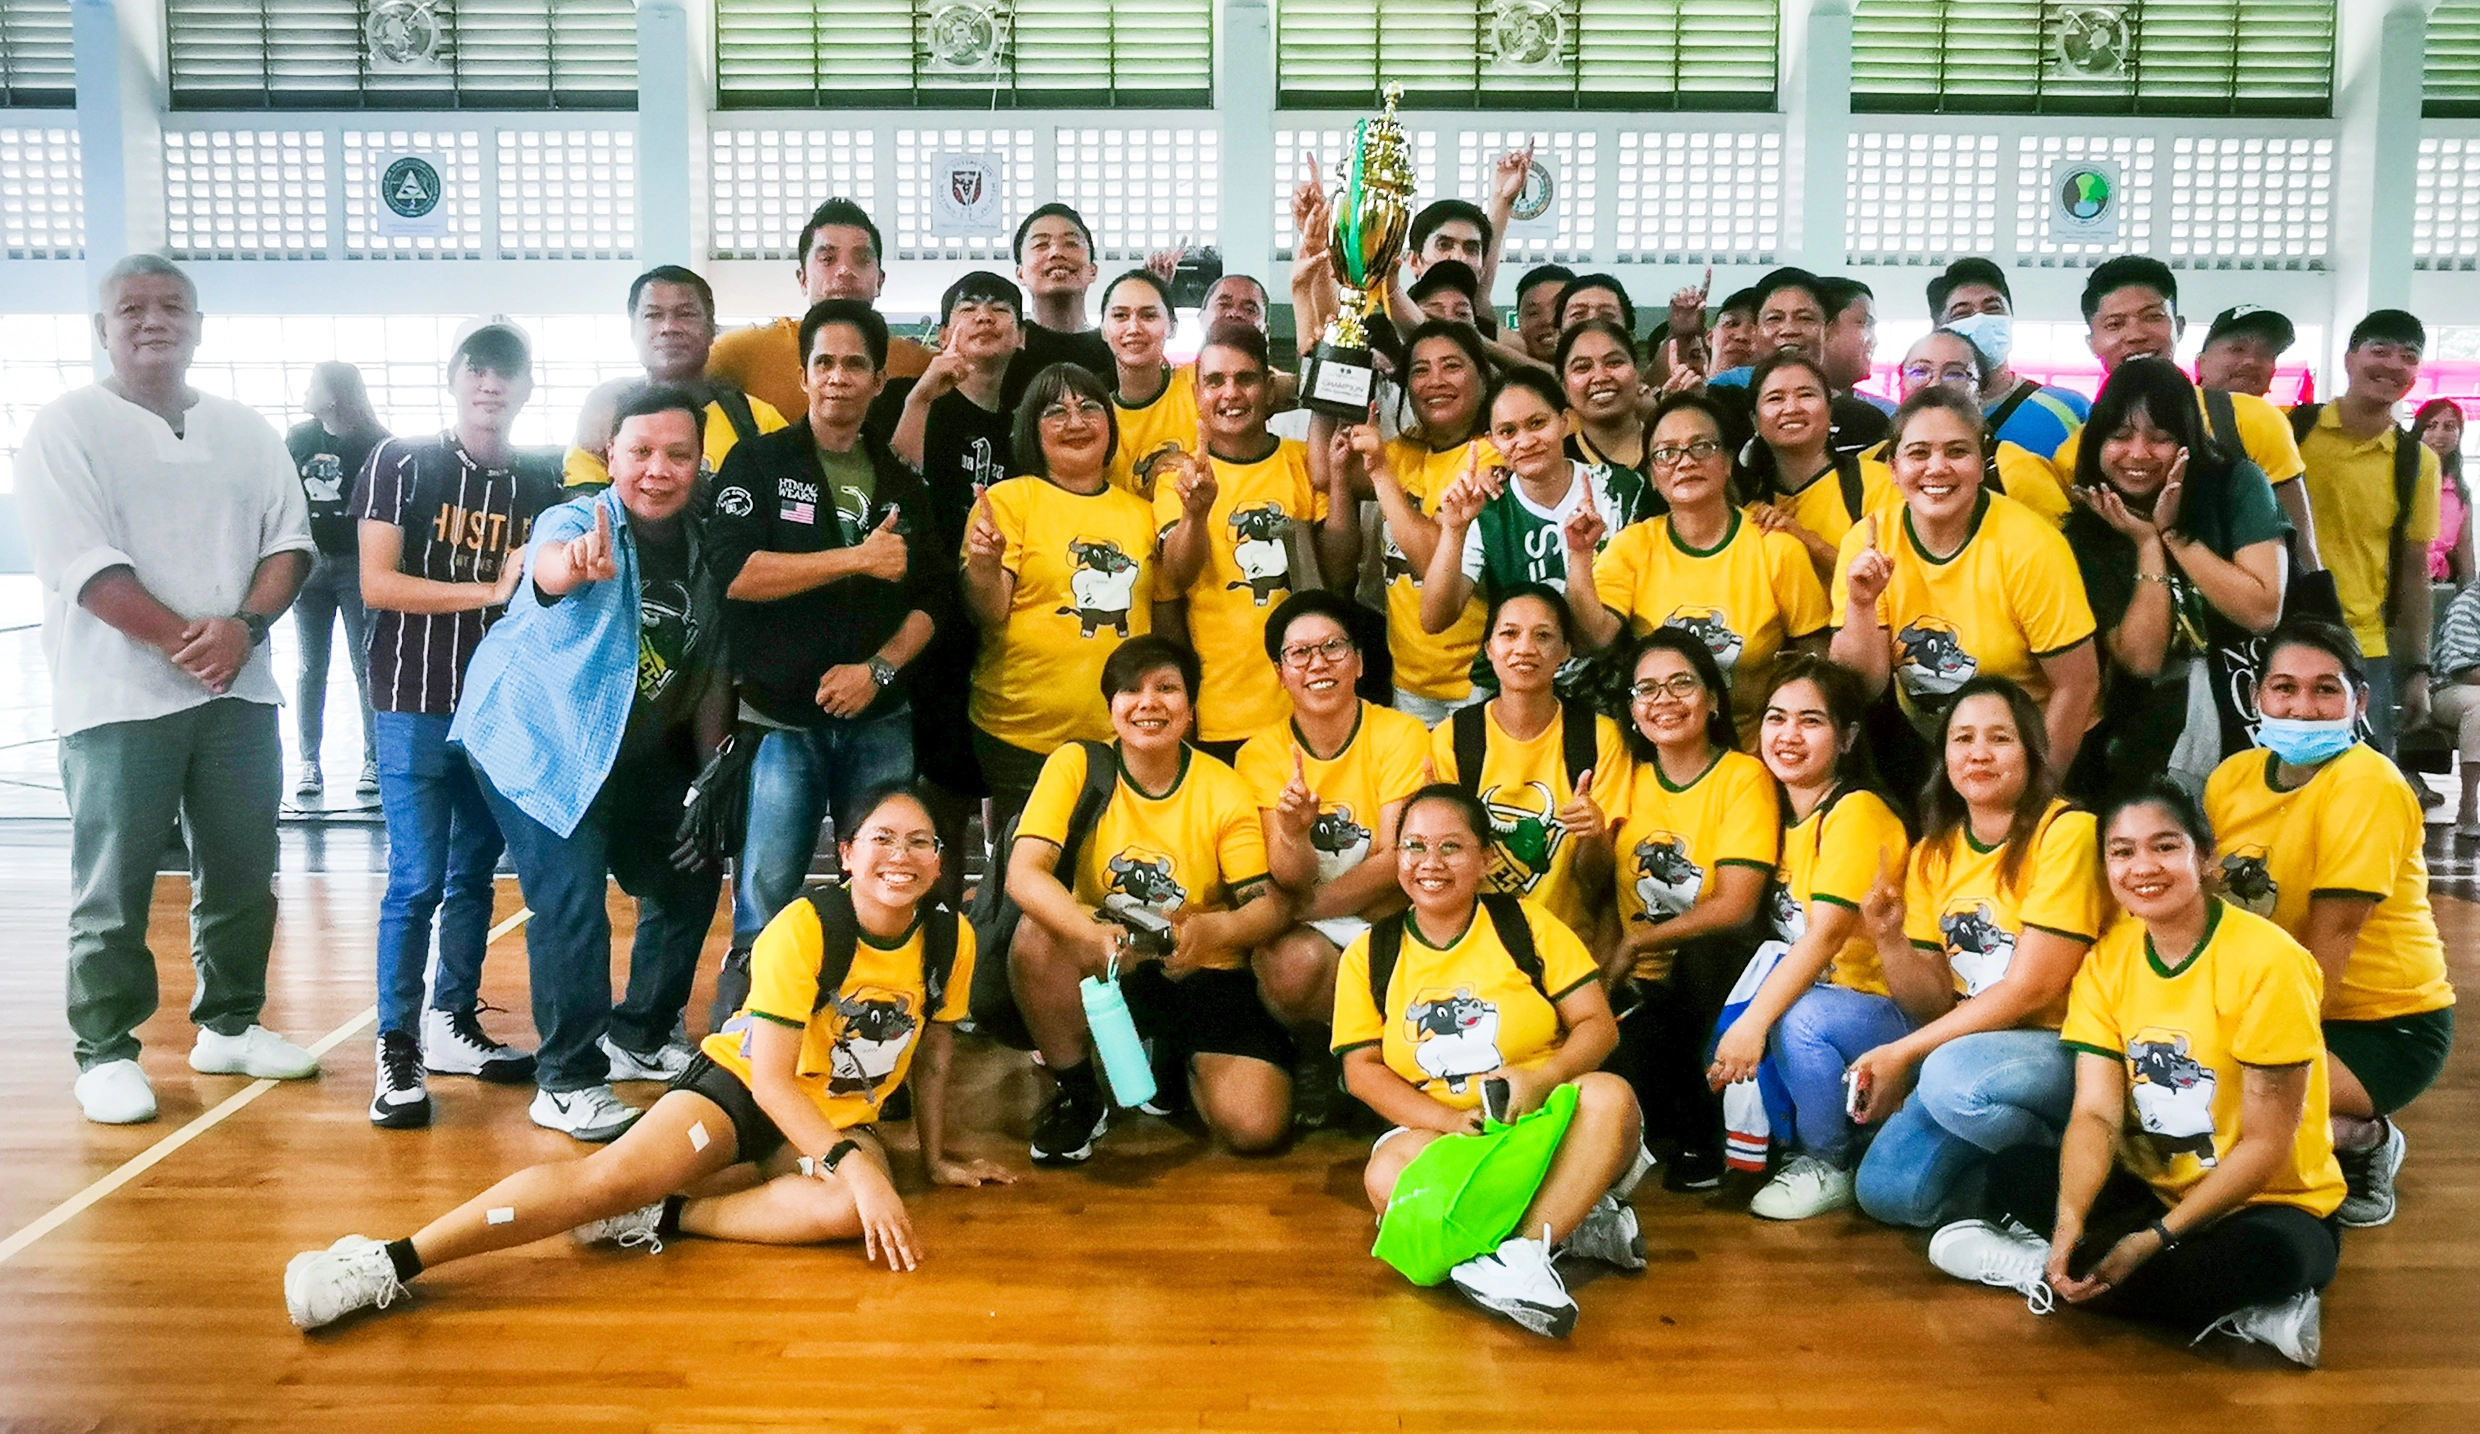 IPB teams up with NCPC, CES, and BIOTECH, reigns in CAFS Sportsfest